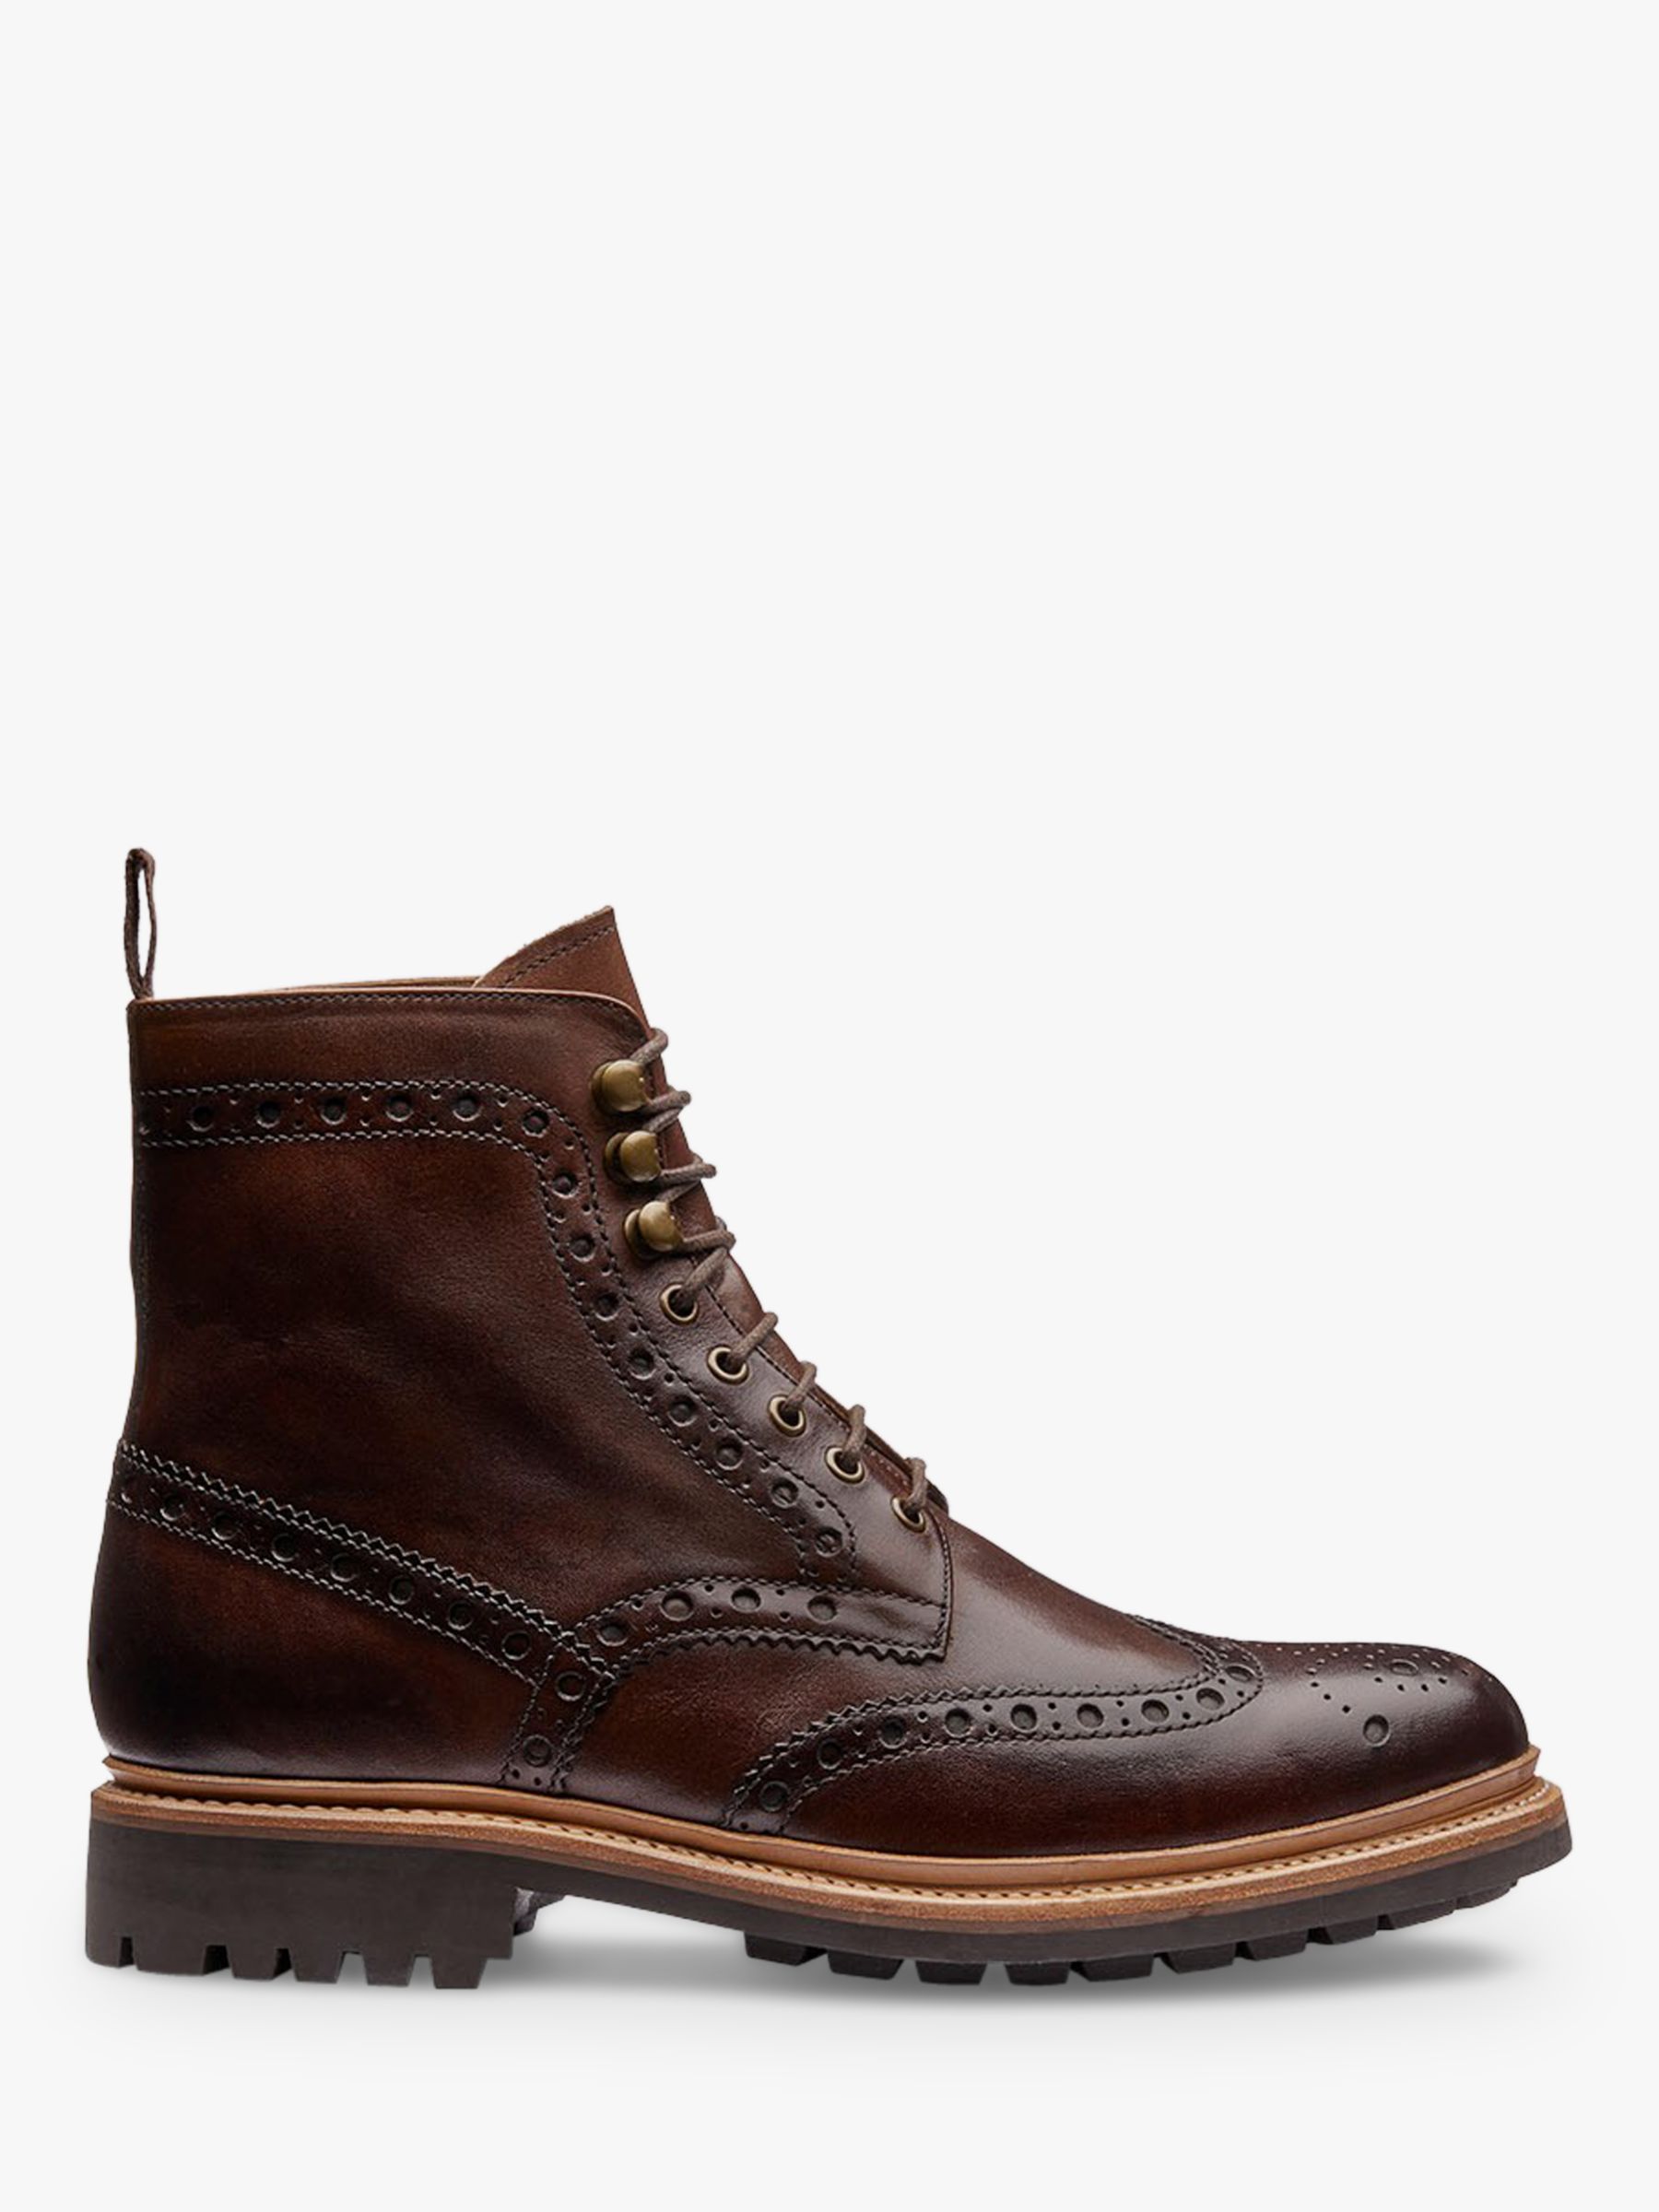 grenson fred boot